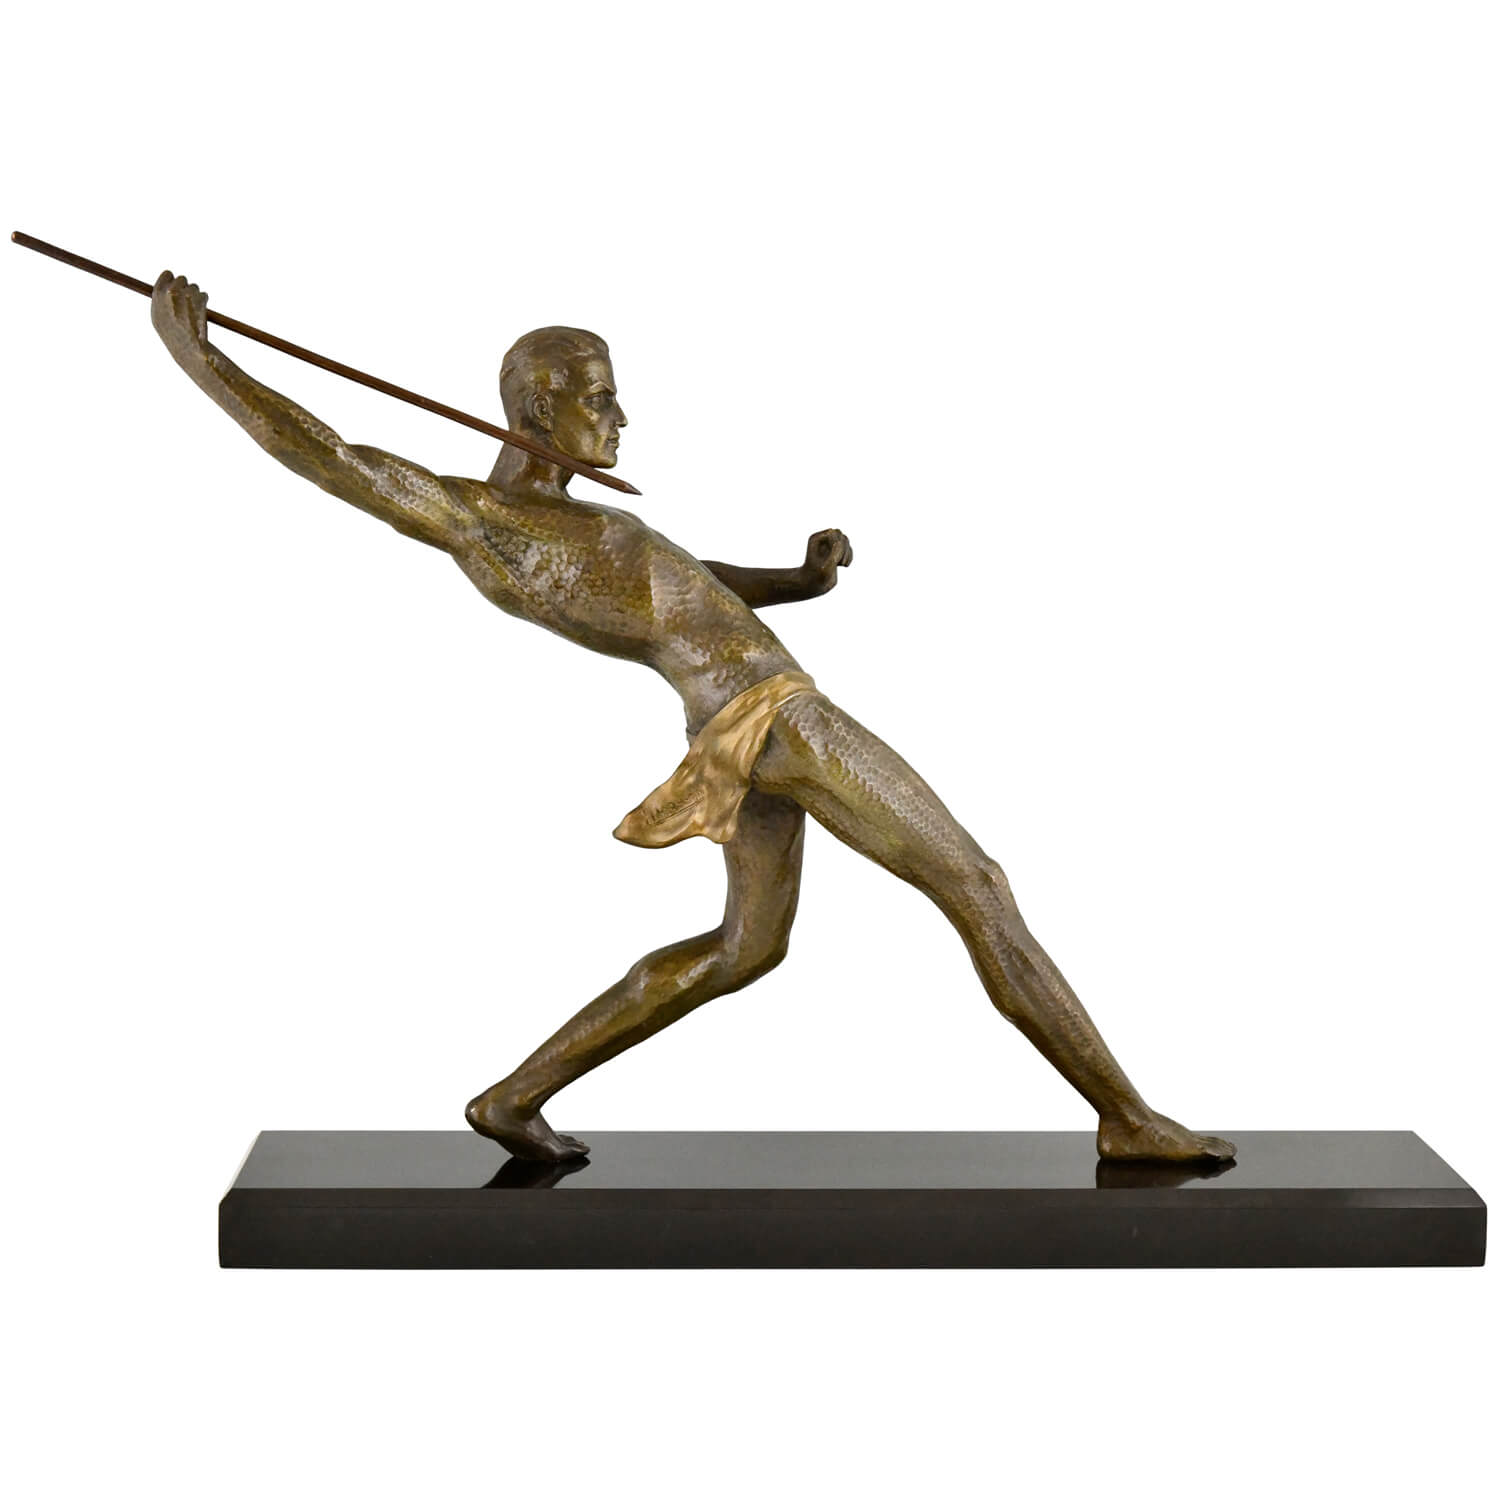 Art Deco sculpture Limousin athlete with spear javelin thrower